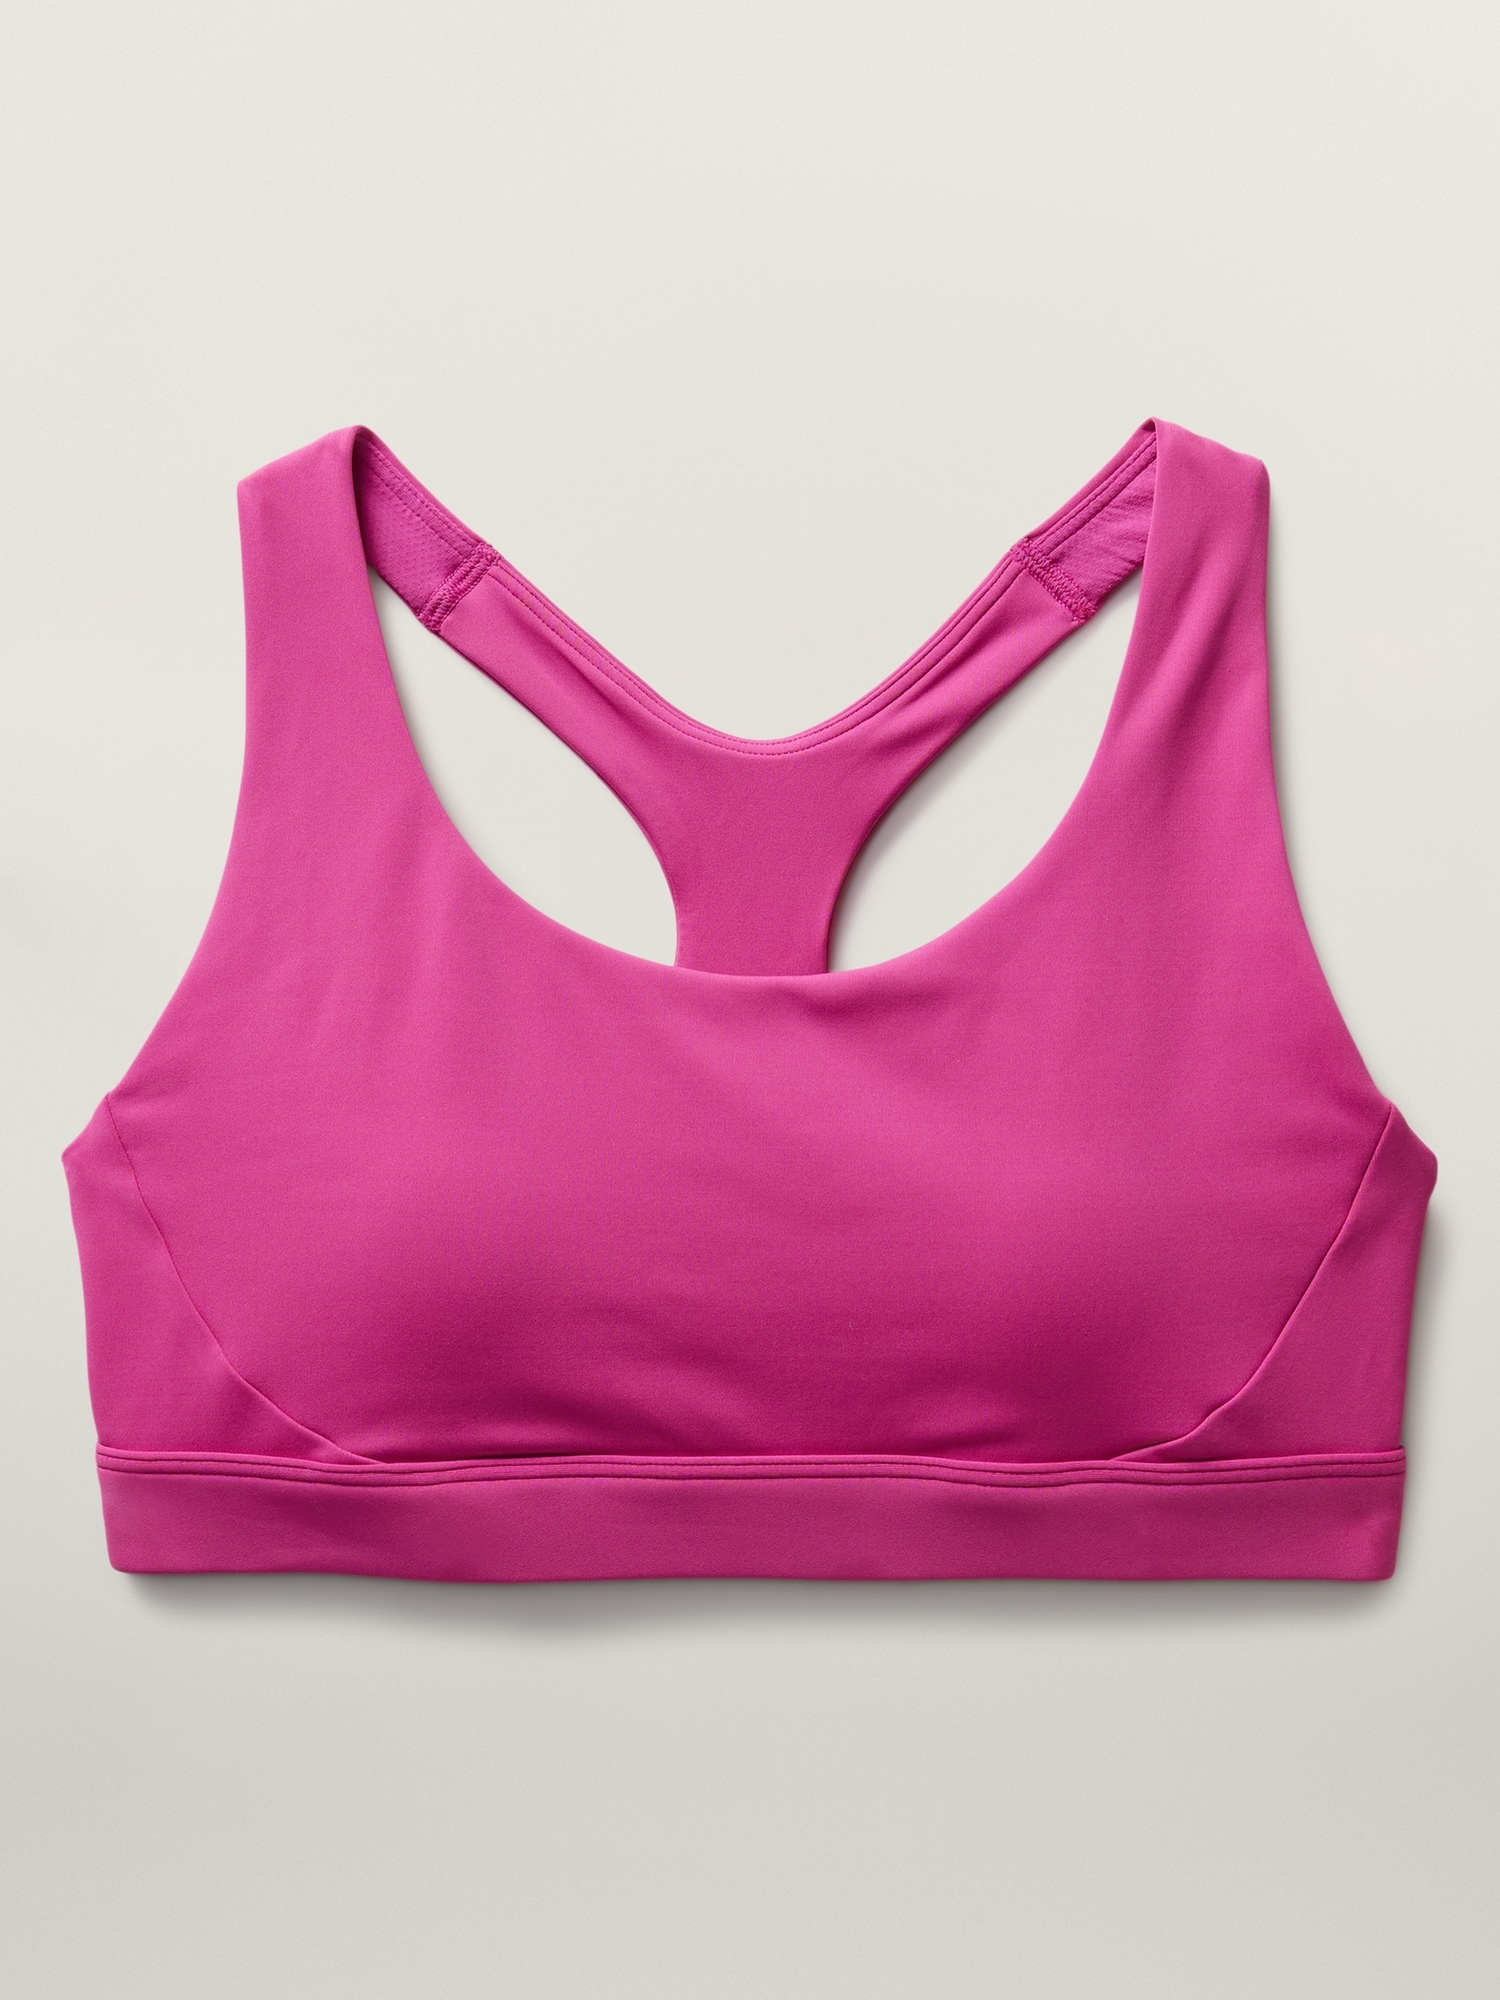 Athleta Empower II train bra, A-C Size L - $28 New With Tags - From Maria